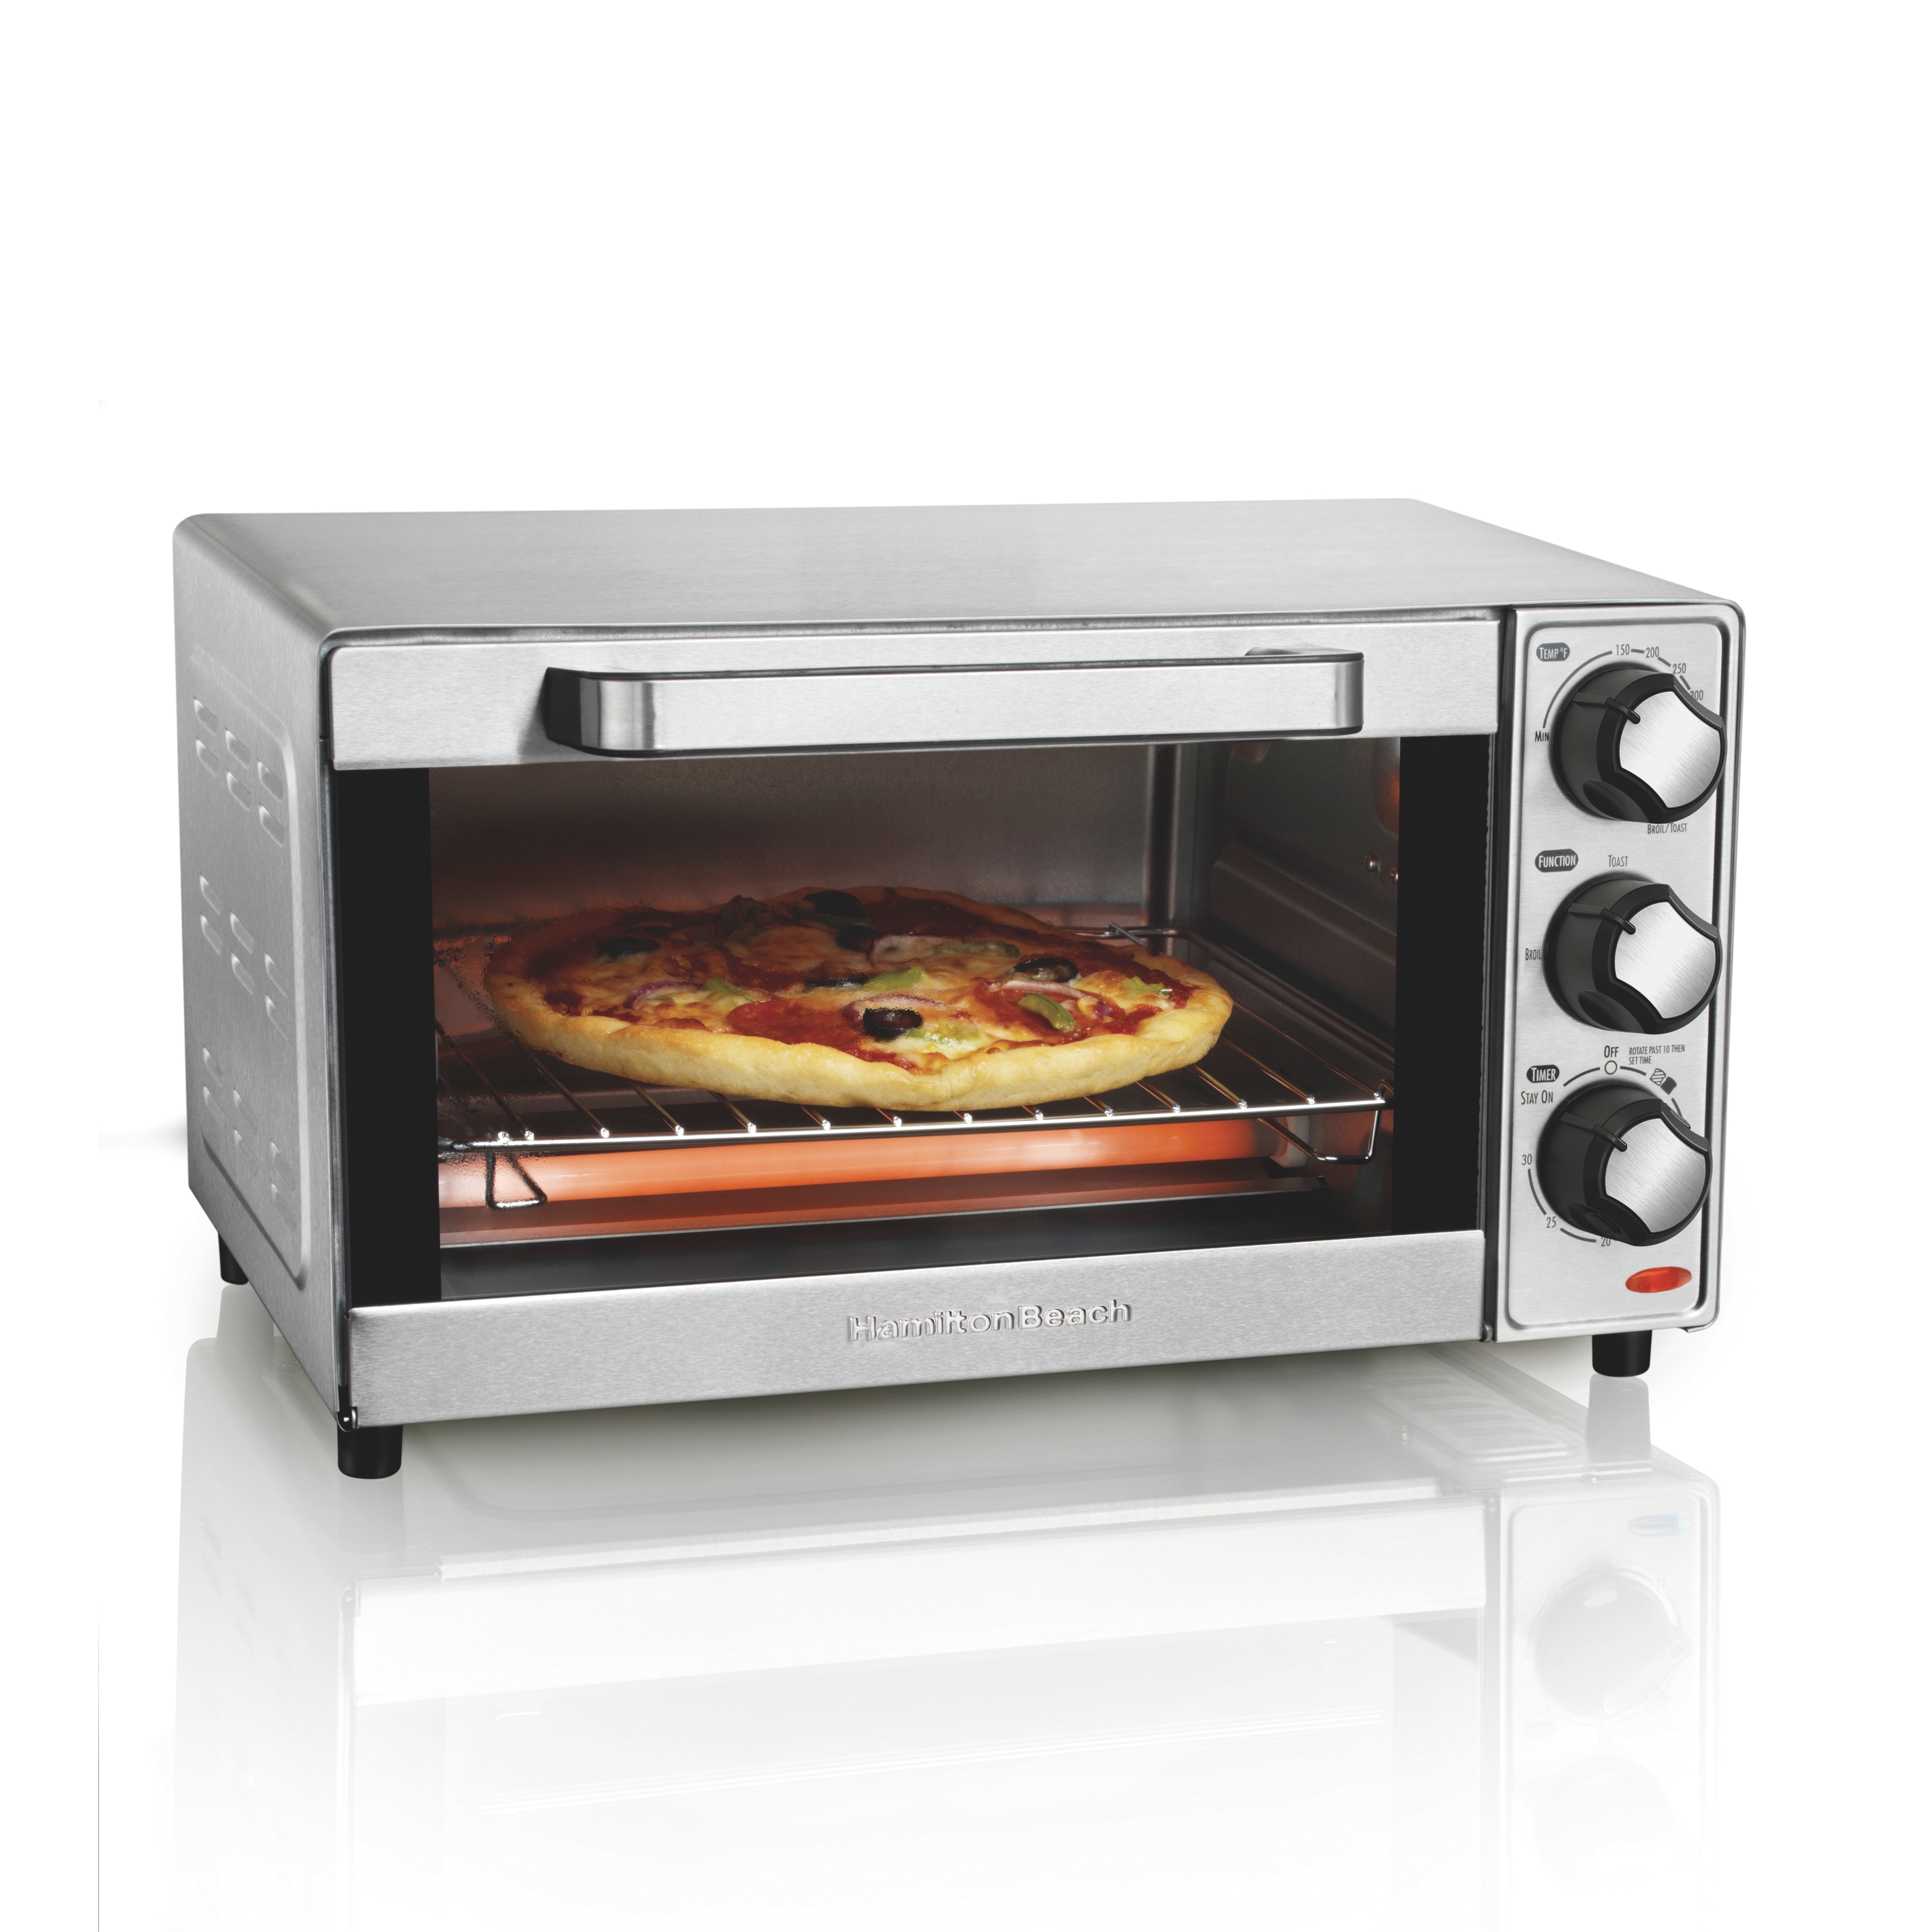 https://ak1.ostkcdn.com/images/products/is/images/direct/47c6f1f21b37b3c38aa73e06540fadb214d35a2c/Toaster-Oven.jpg